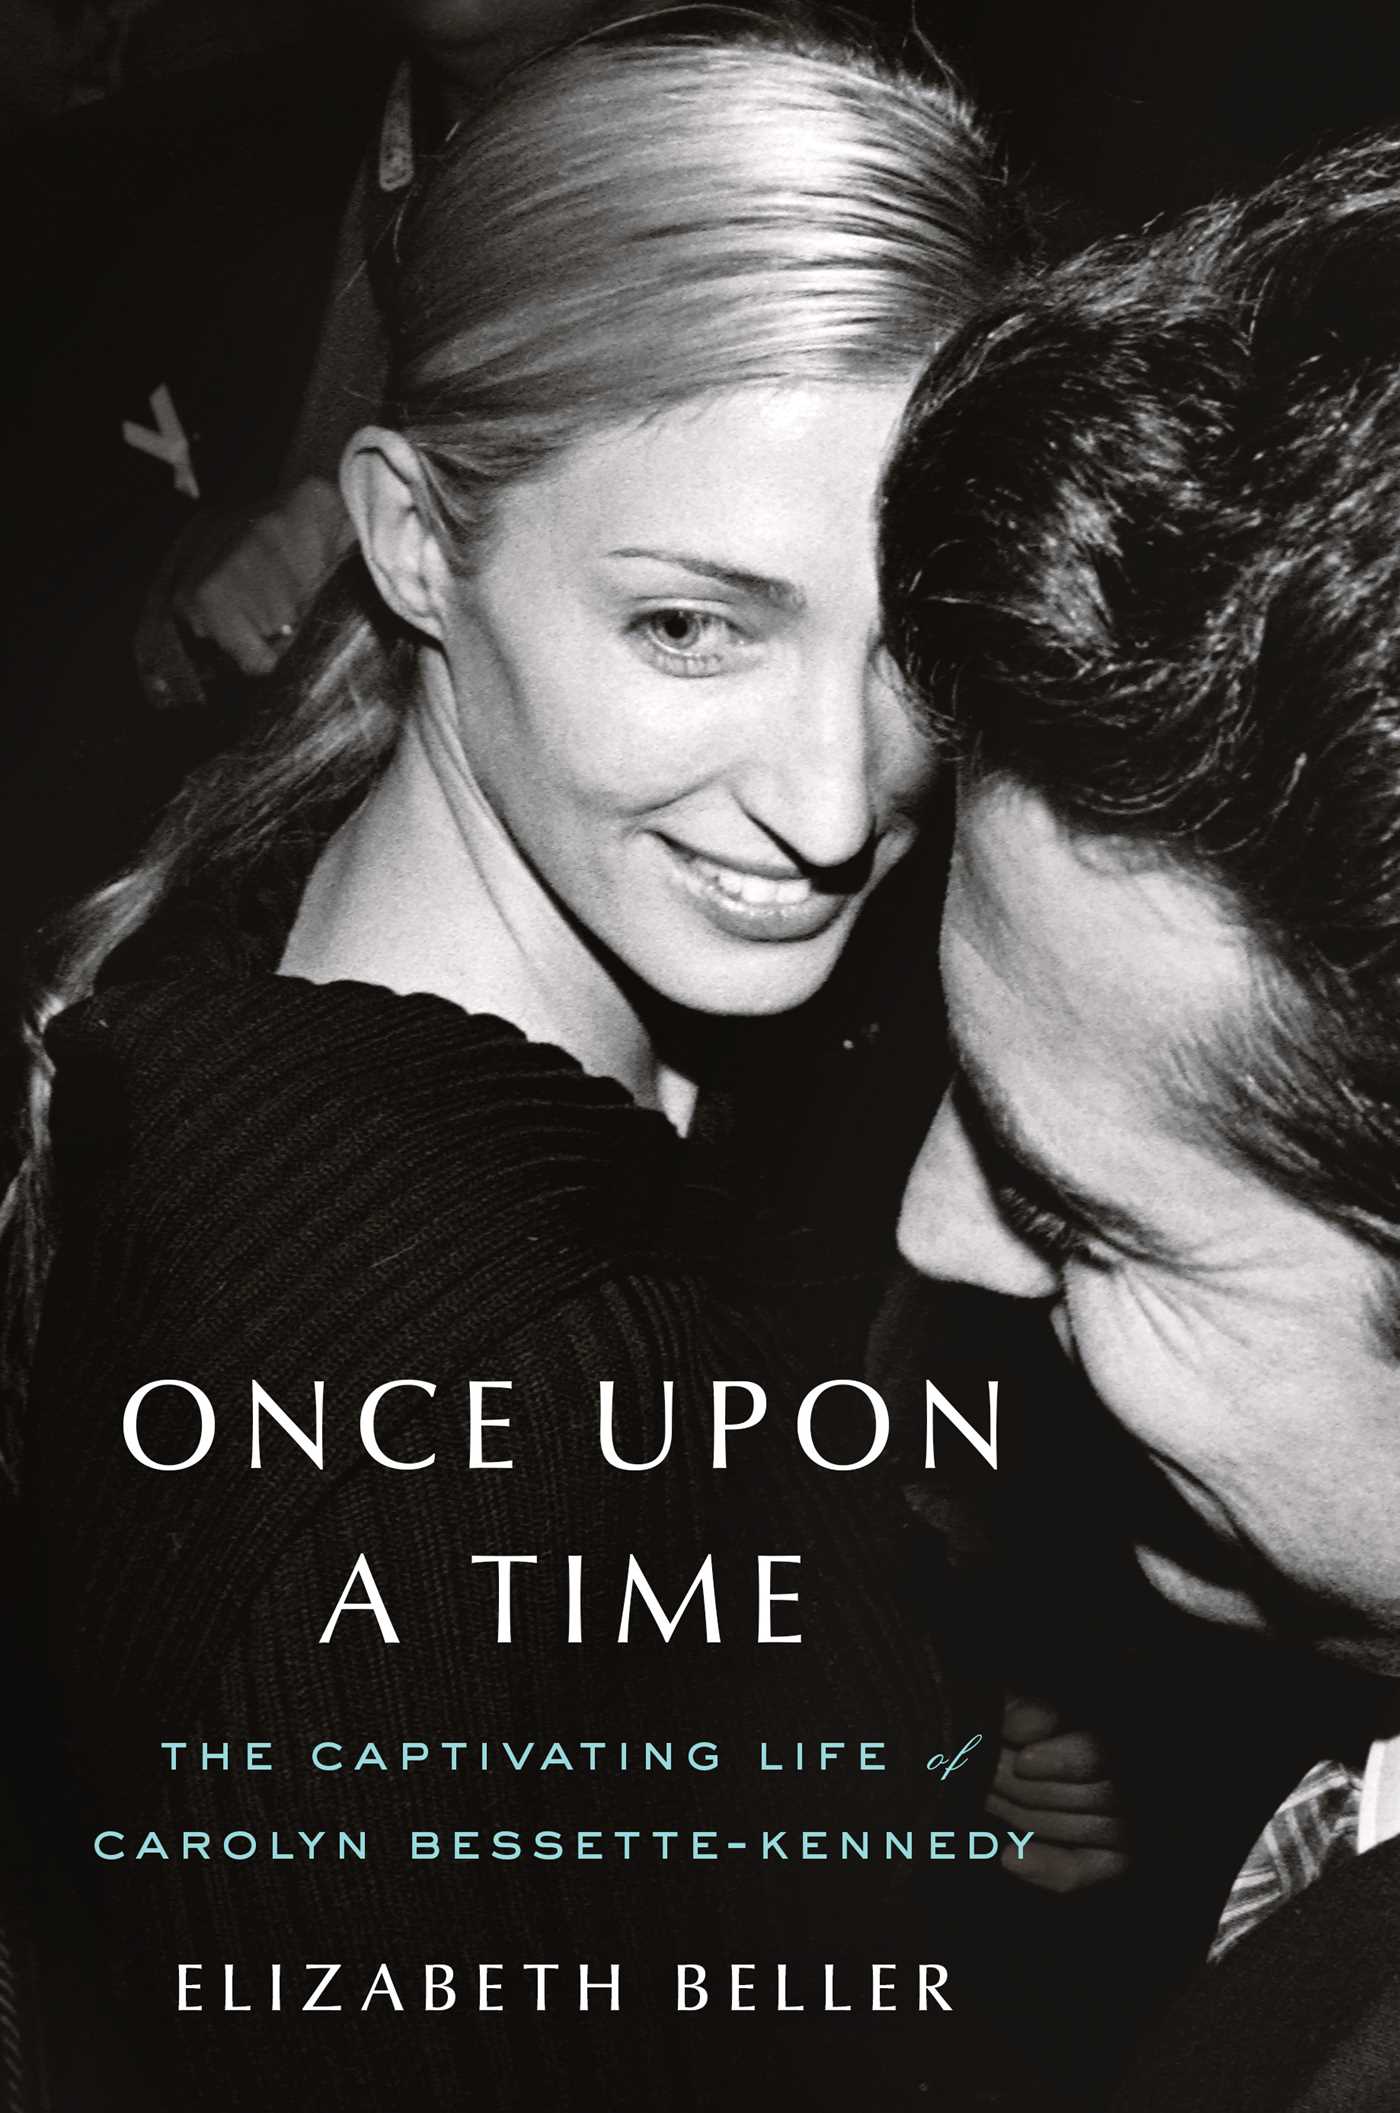 Image for "Once Upon a Time"